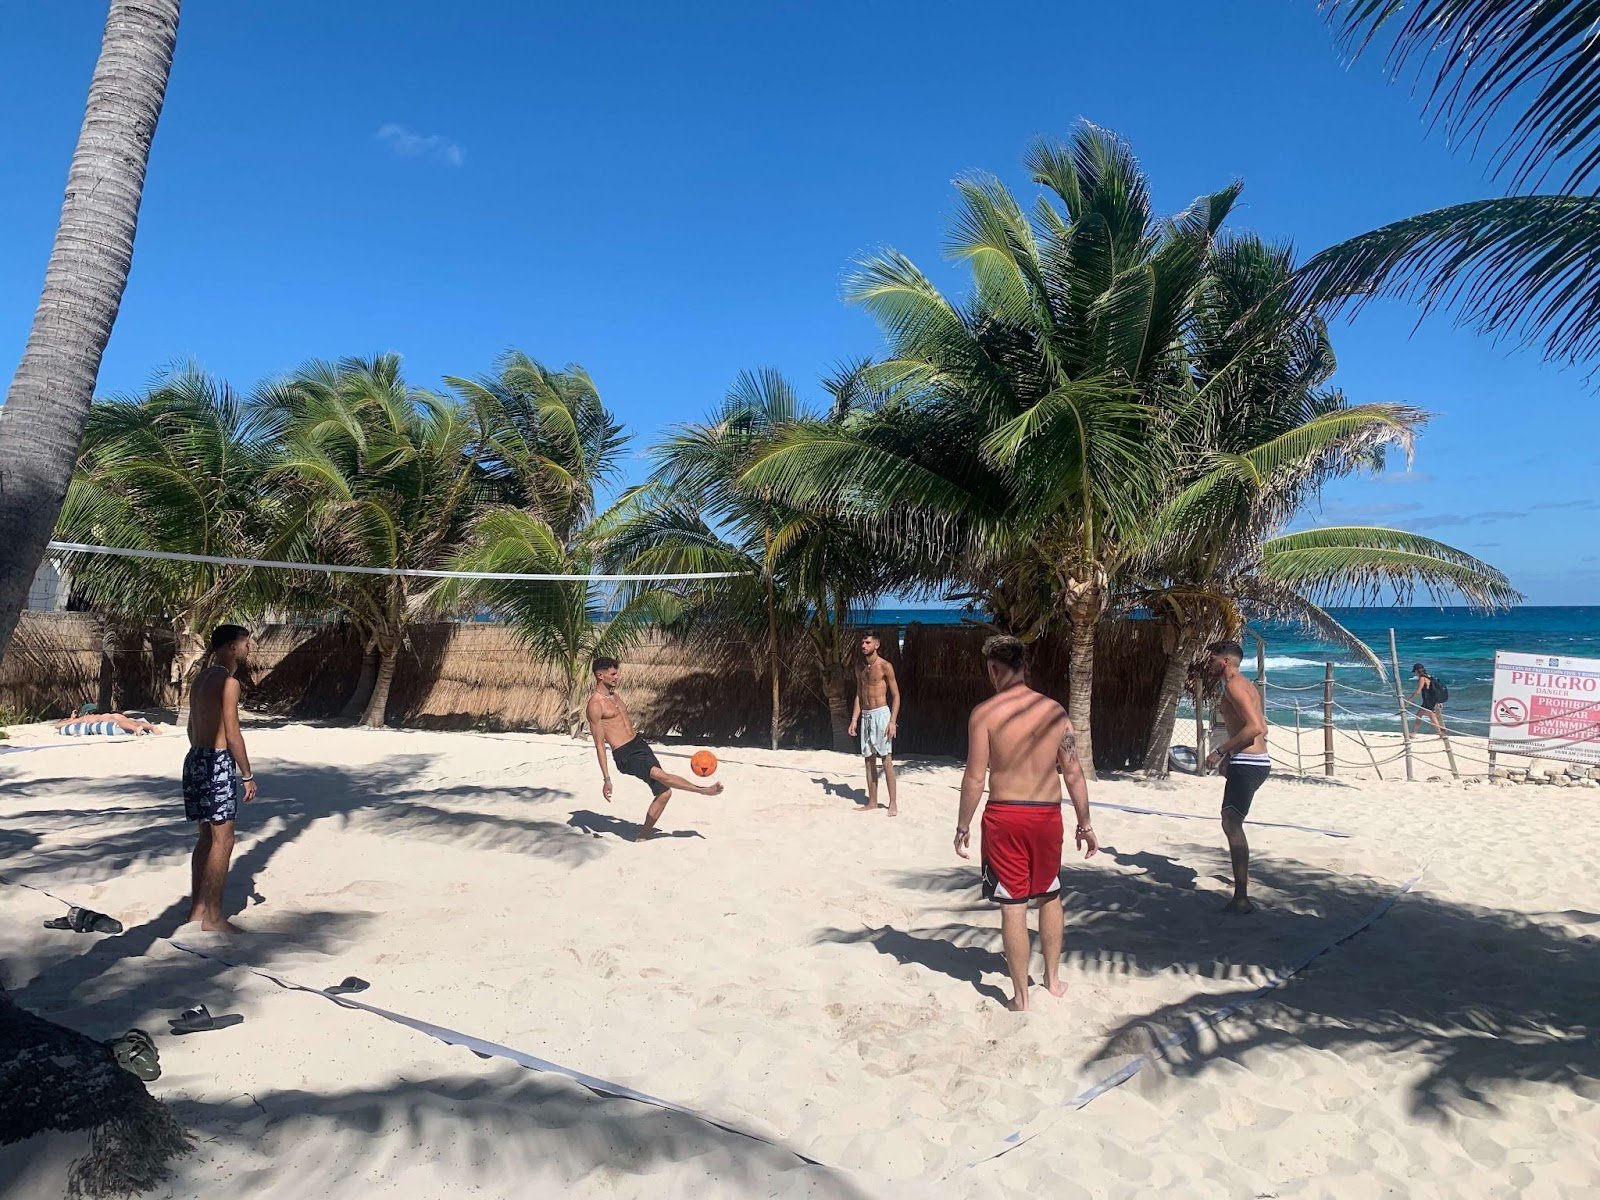 5 people playing football on the white sand. Palm tree and turquoise waters in the background. Isla Mujeres, Mexico. 